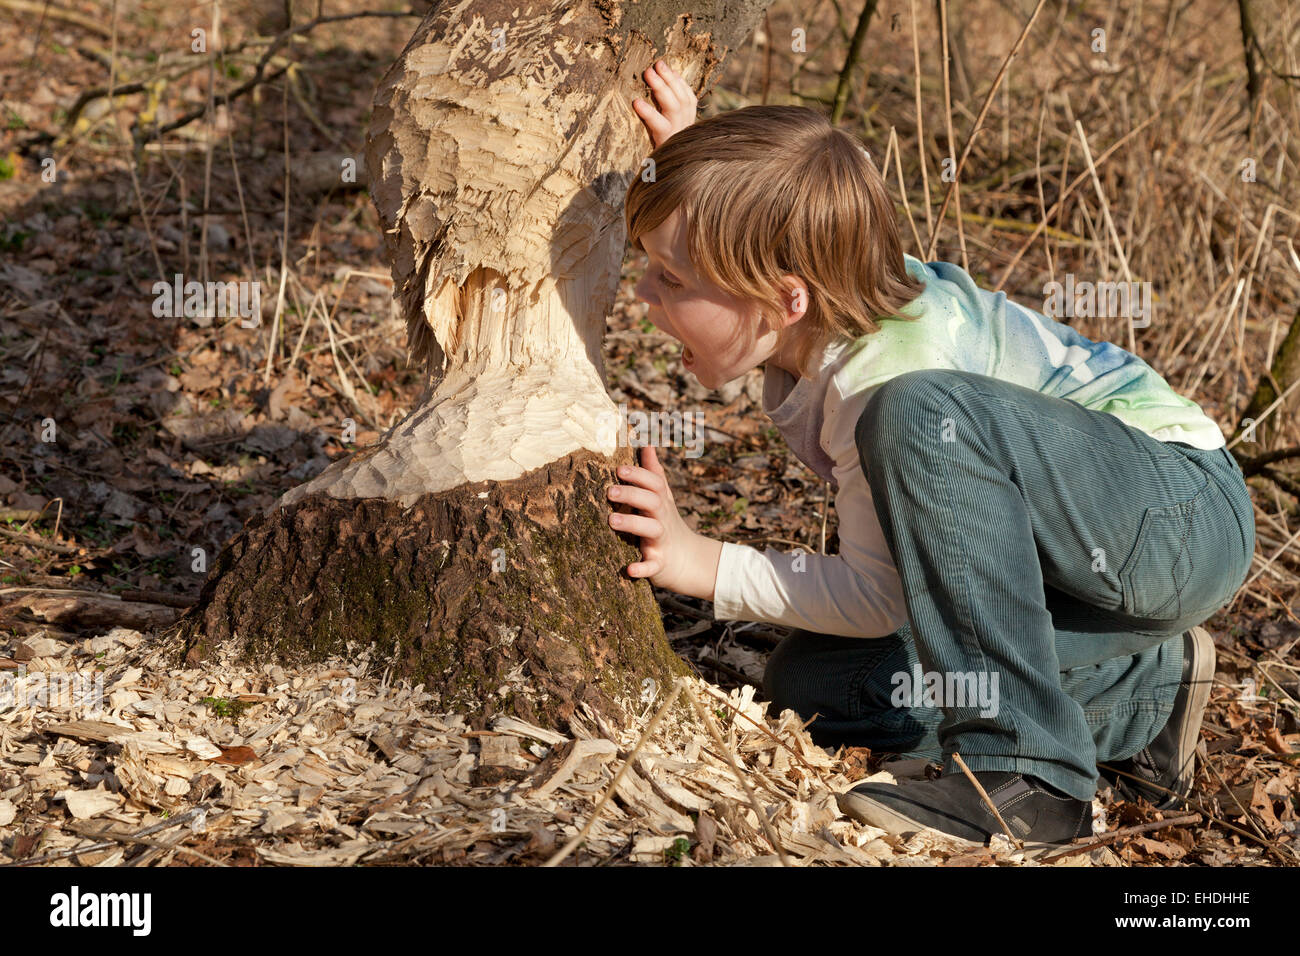 young boy pretending to bite into a tree damaged by a beaver near Sandkrug, Schnakenbek, Schleswig-Holstein, Germany Stock Photo